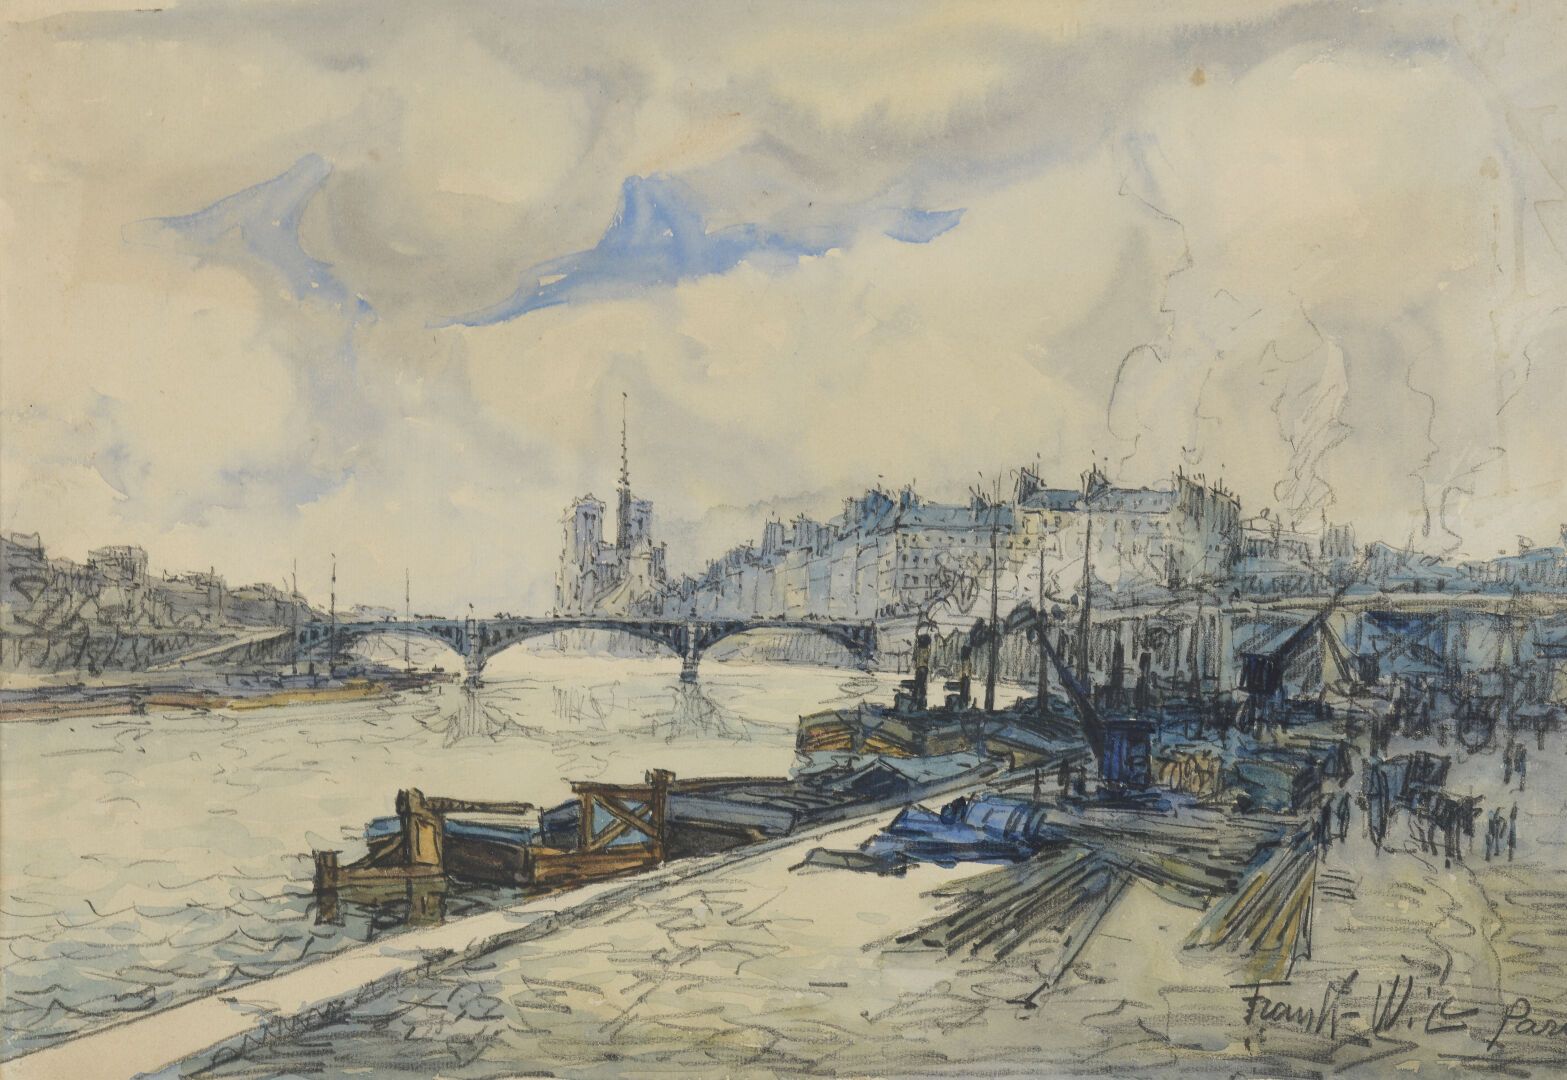 Null FRANK-WILL (1900-1951)

View of the Seine, Notre-Dame in the background

Ch&hellip;